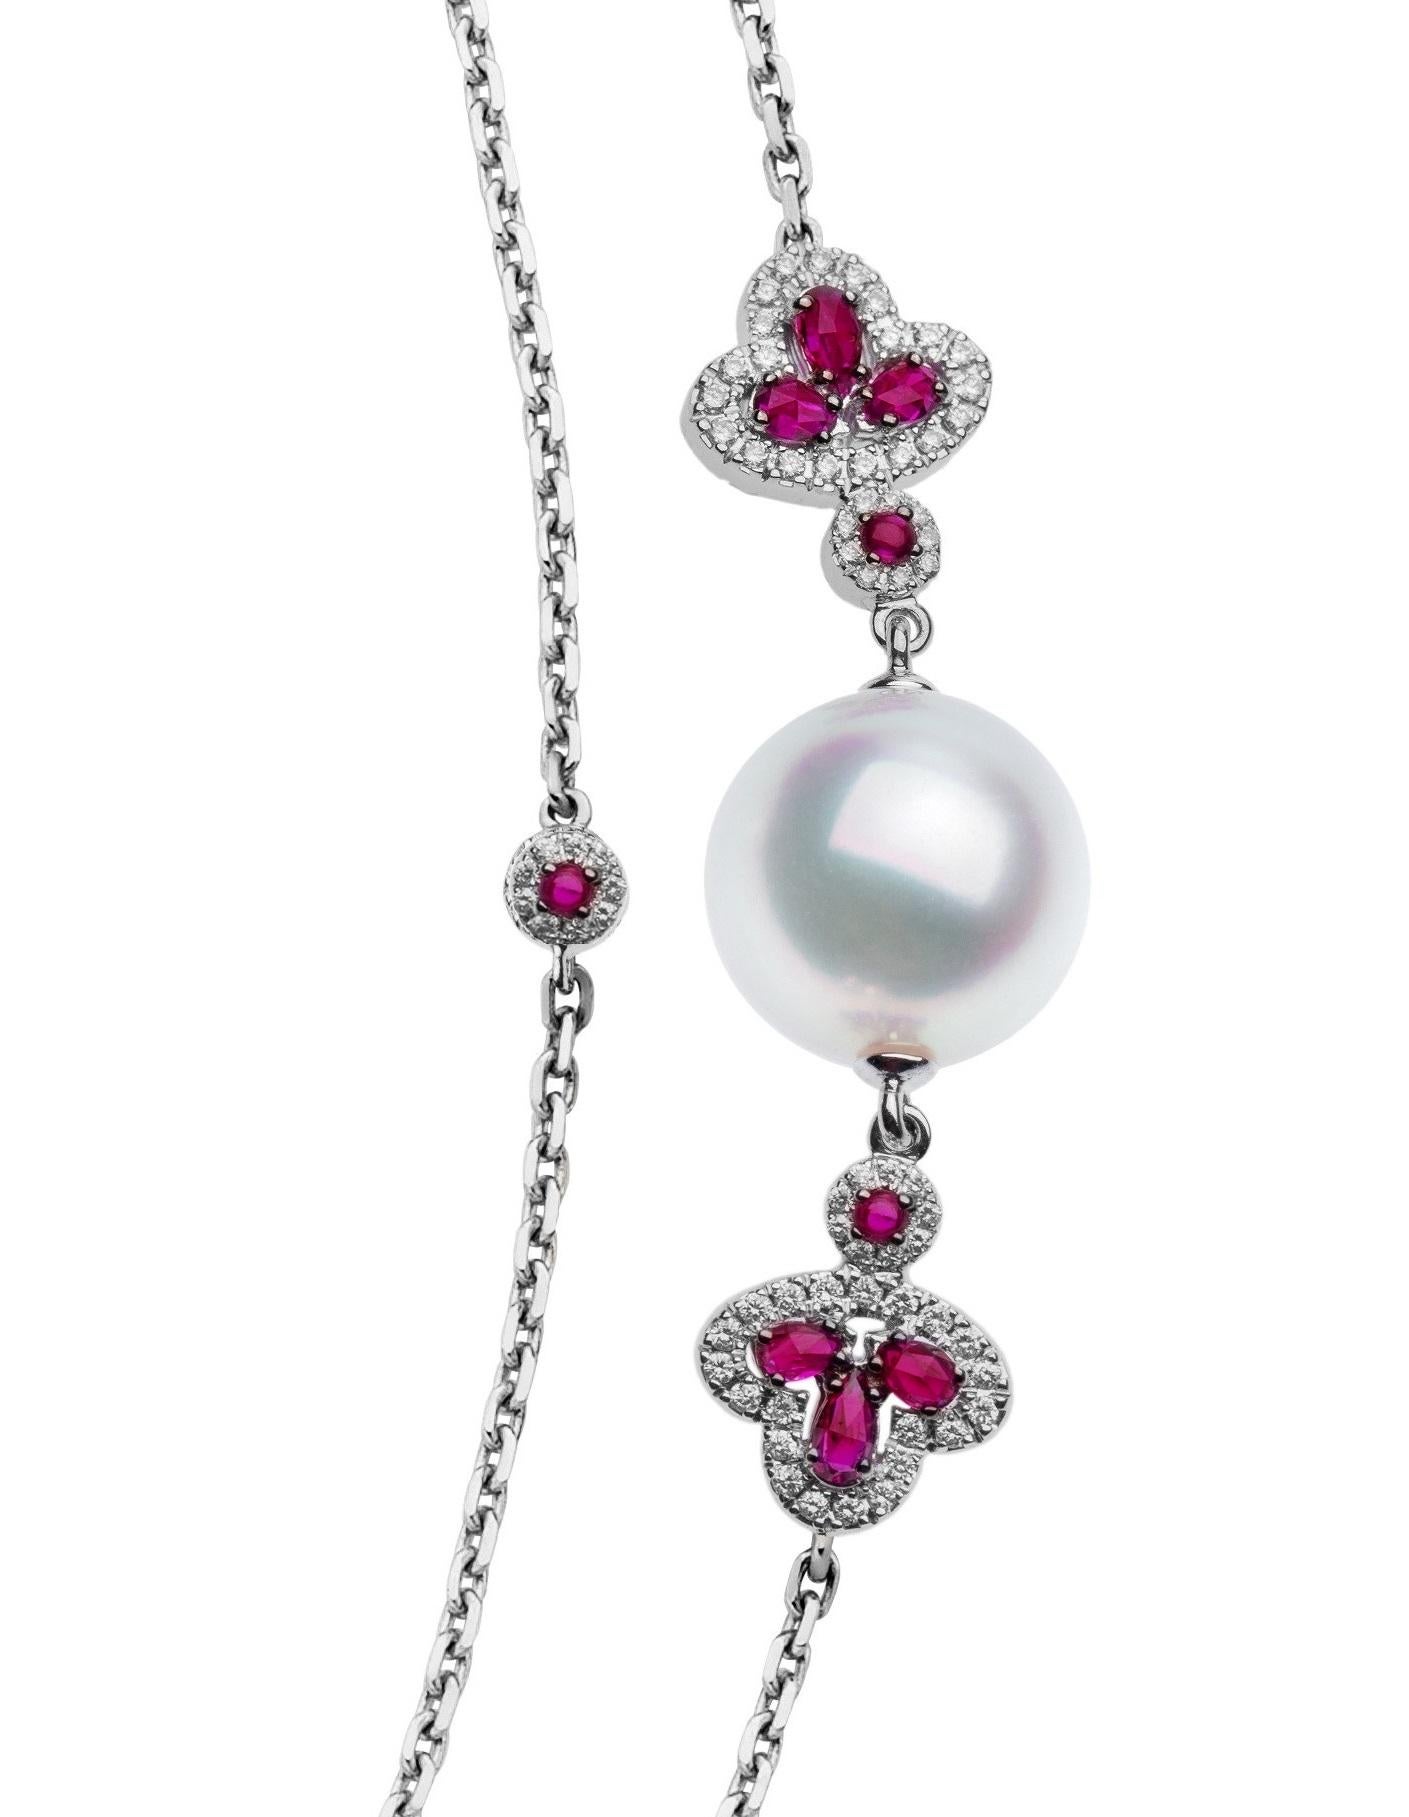 One 18 Karat white gold, 50-inch long necklace comprised of 7-White South Sea pearls, 39 pear-shaped briollet-cut rubies, 40 round cabochon-cut rubies and accent white round brilliant cut diamonds. Each of six pearls that measure approximately 11.0